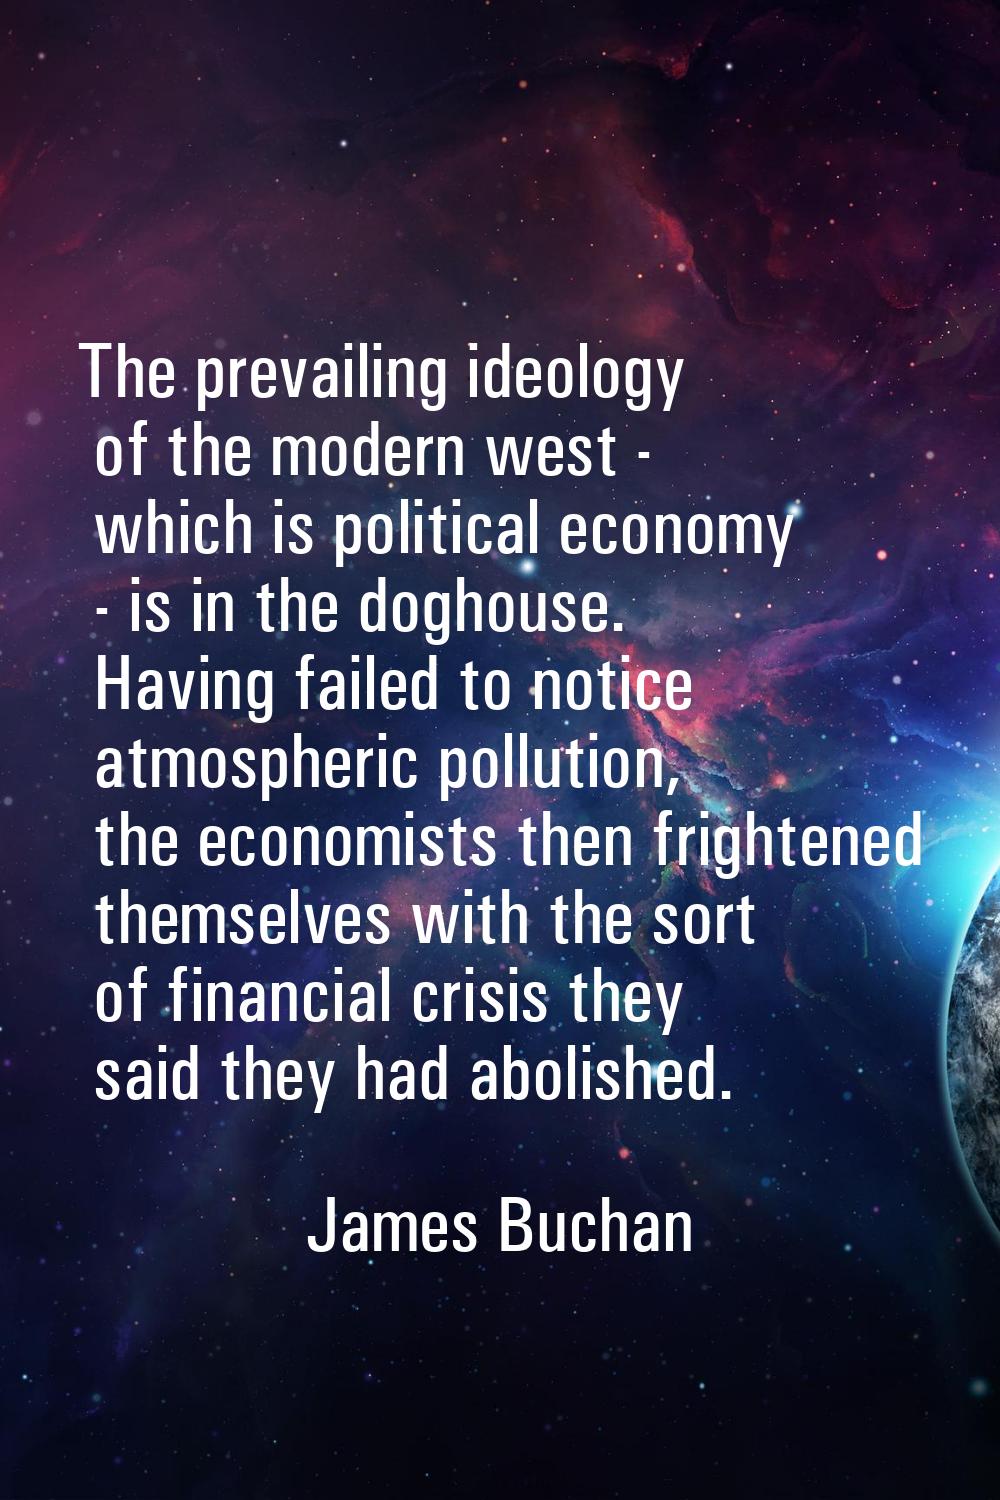 The prevailing ideology of the modern west - which is political economy - is in the doghouse. Havin